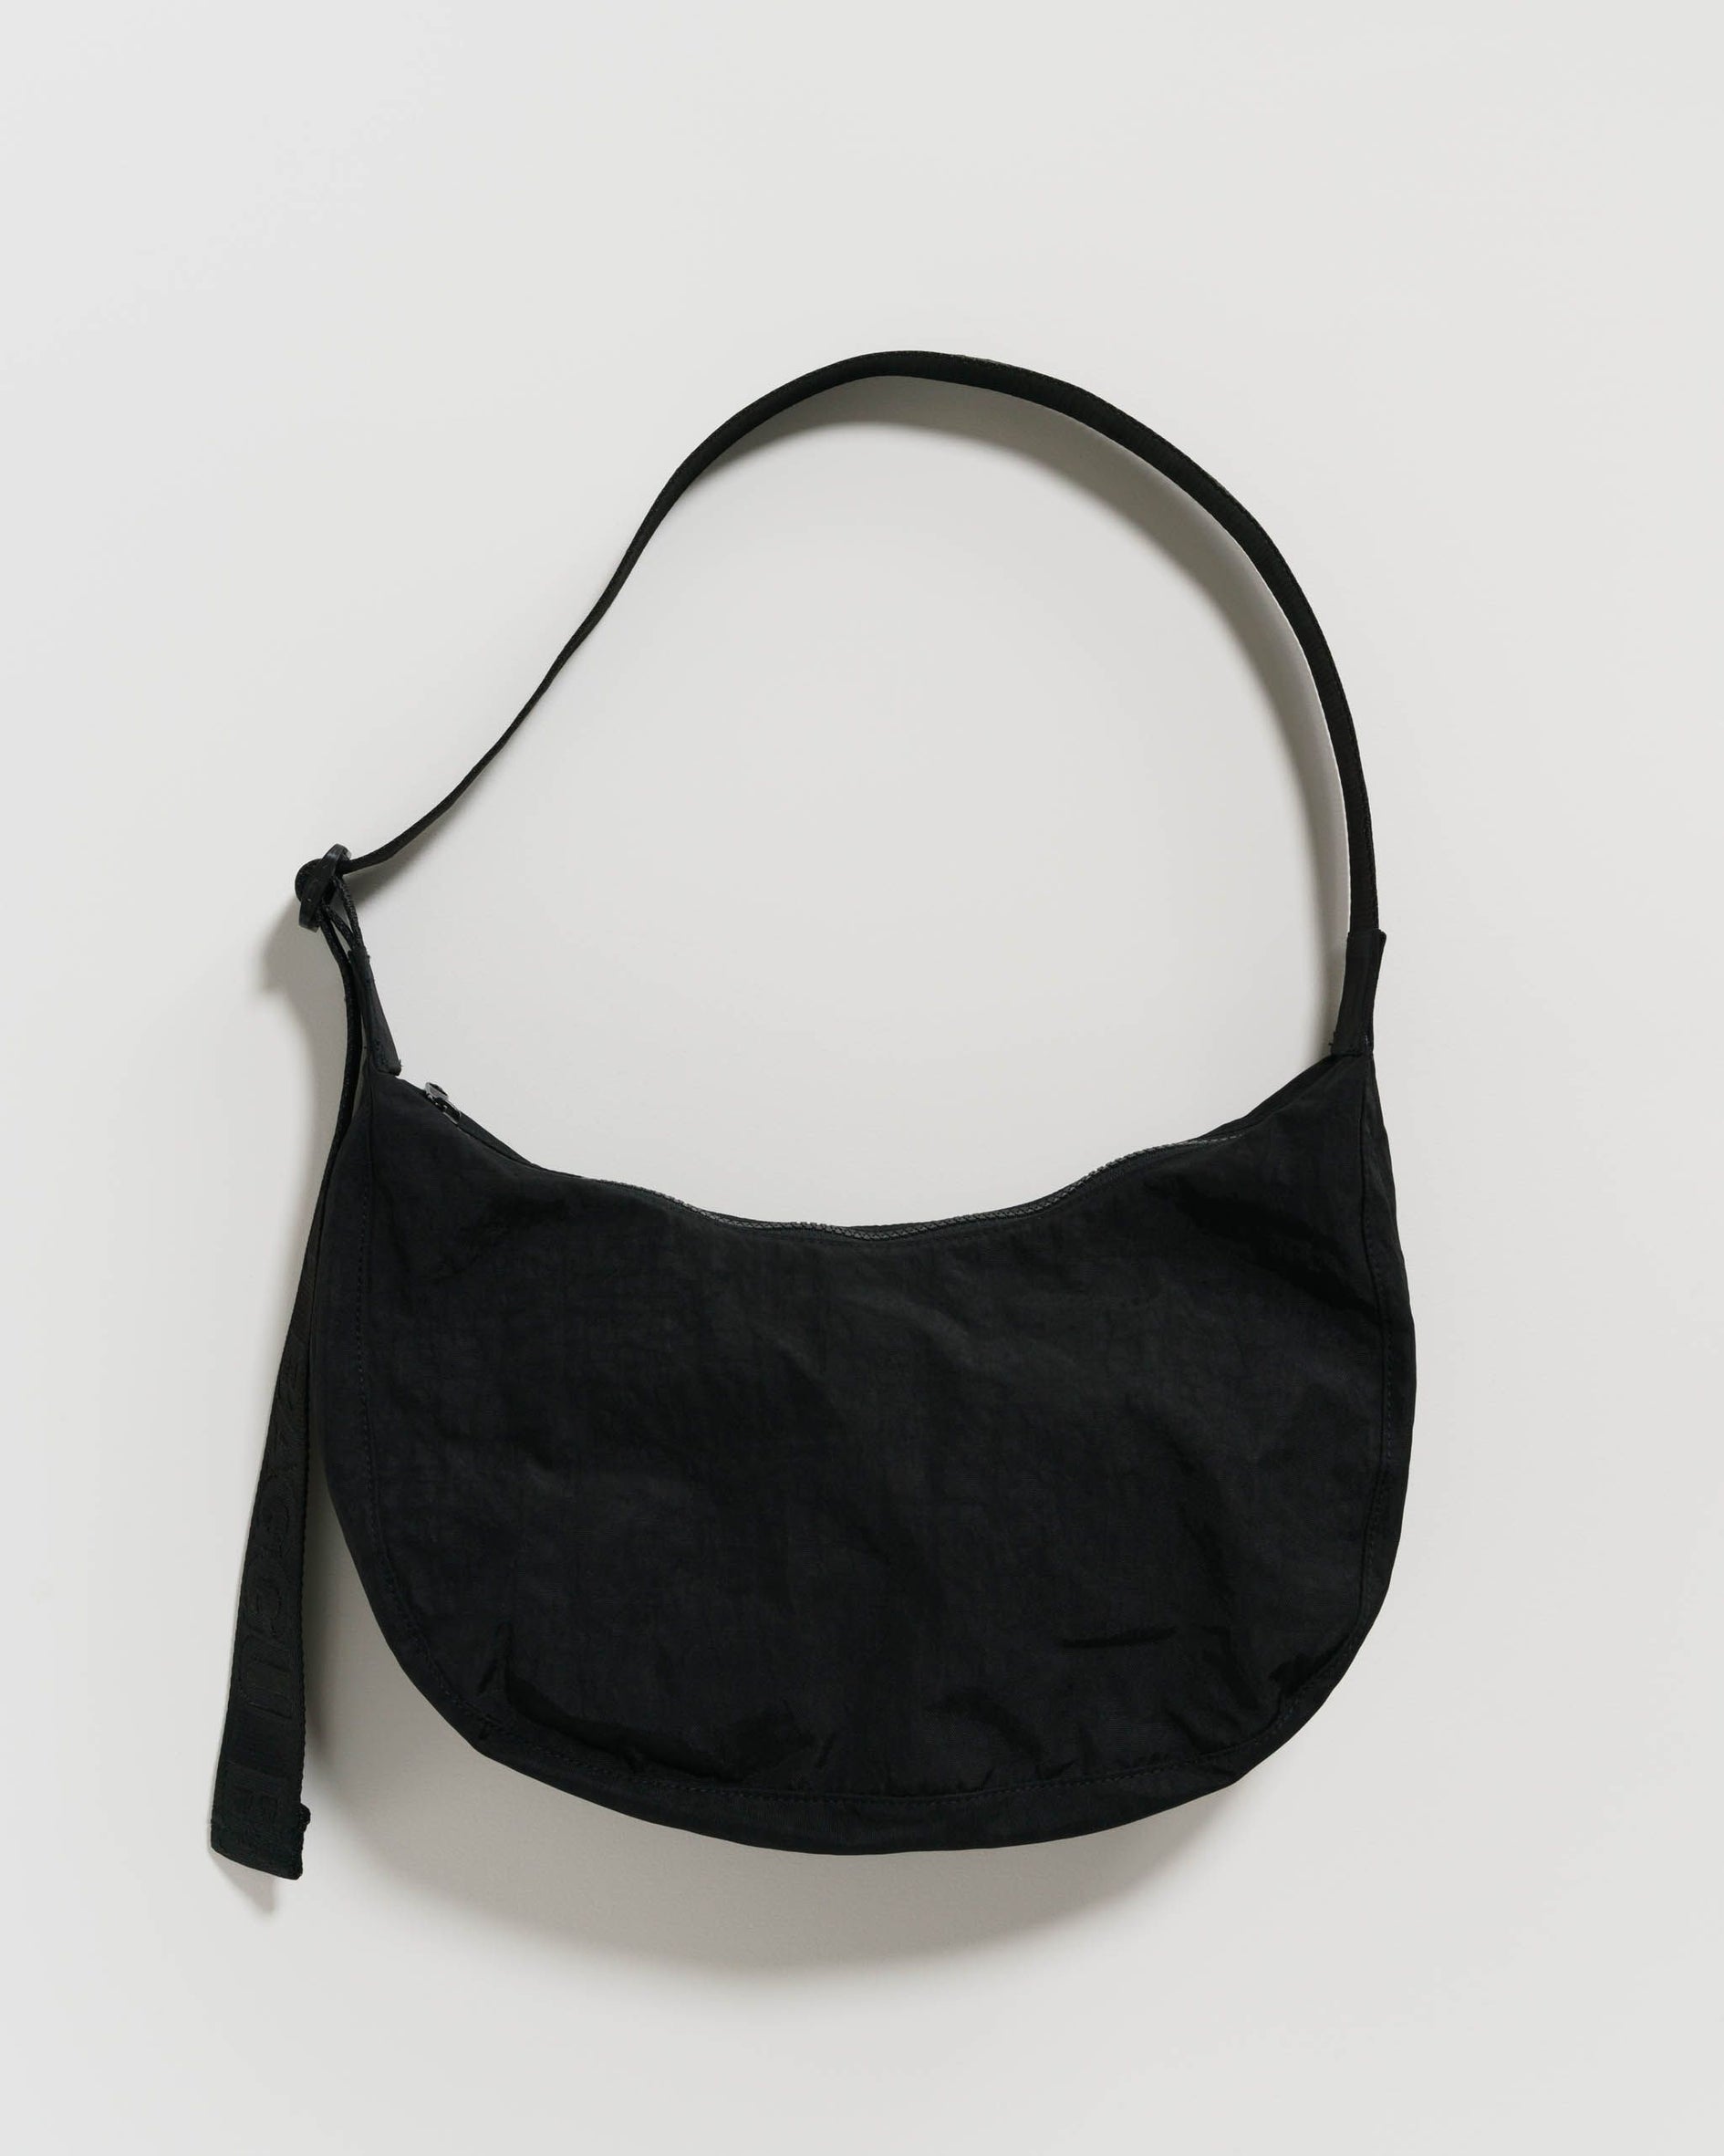 EMIRA CRESCENT BAG – The Right Sided